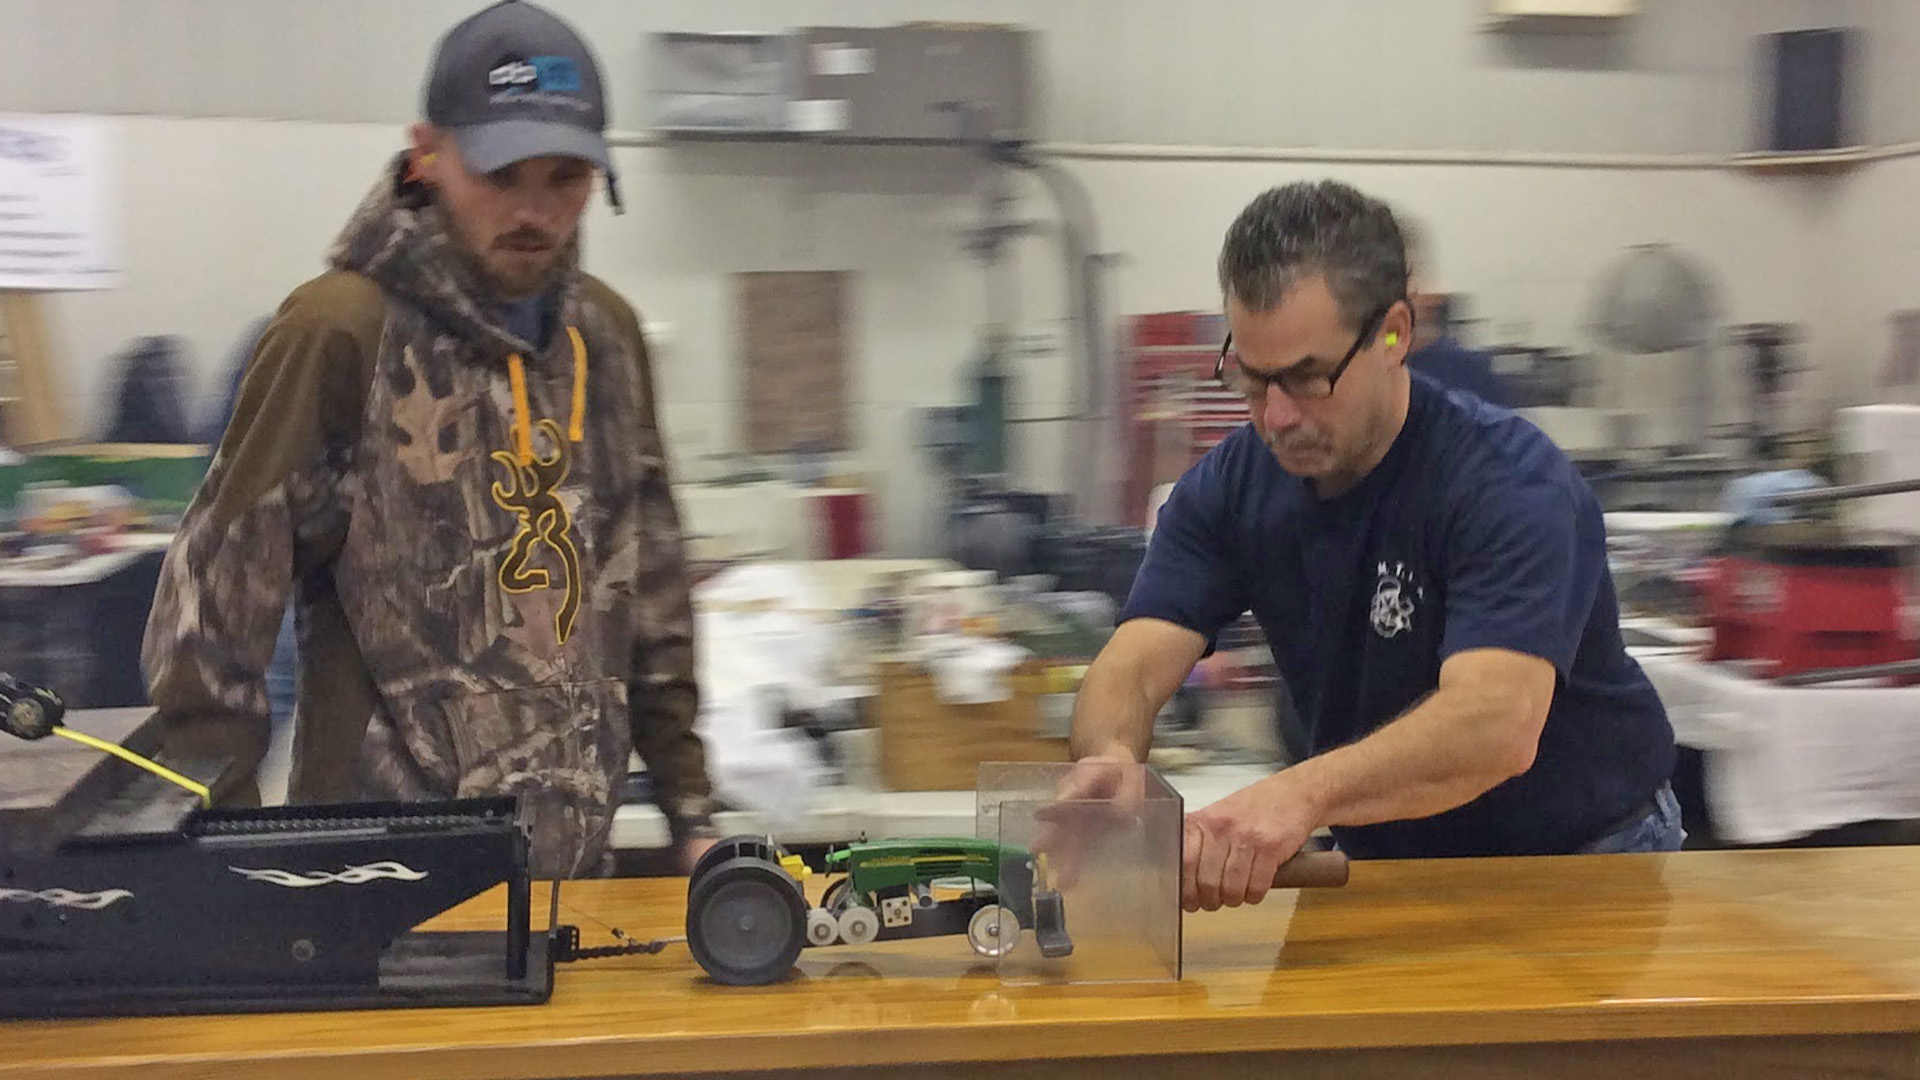 Nitro-Powered Mini Tractor Pulls Take the Action From the Track to the Table